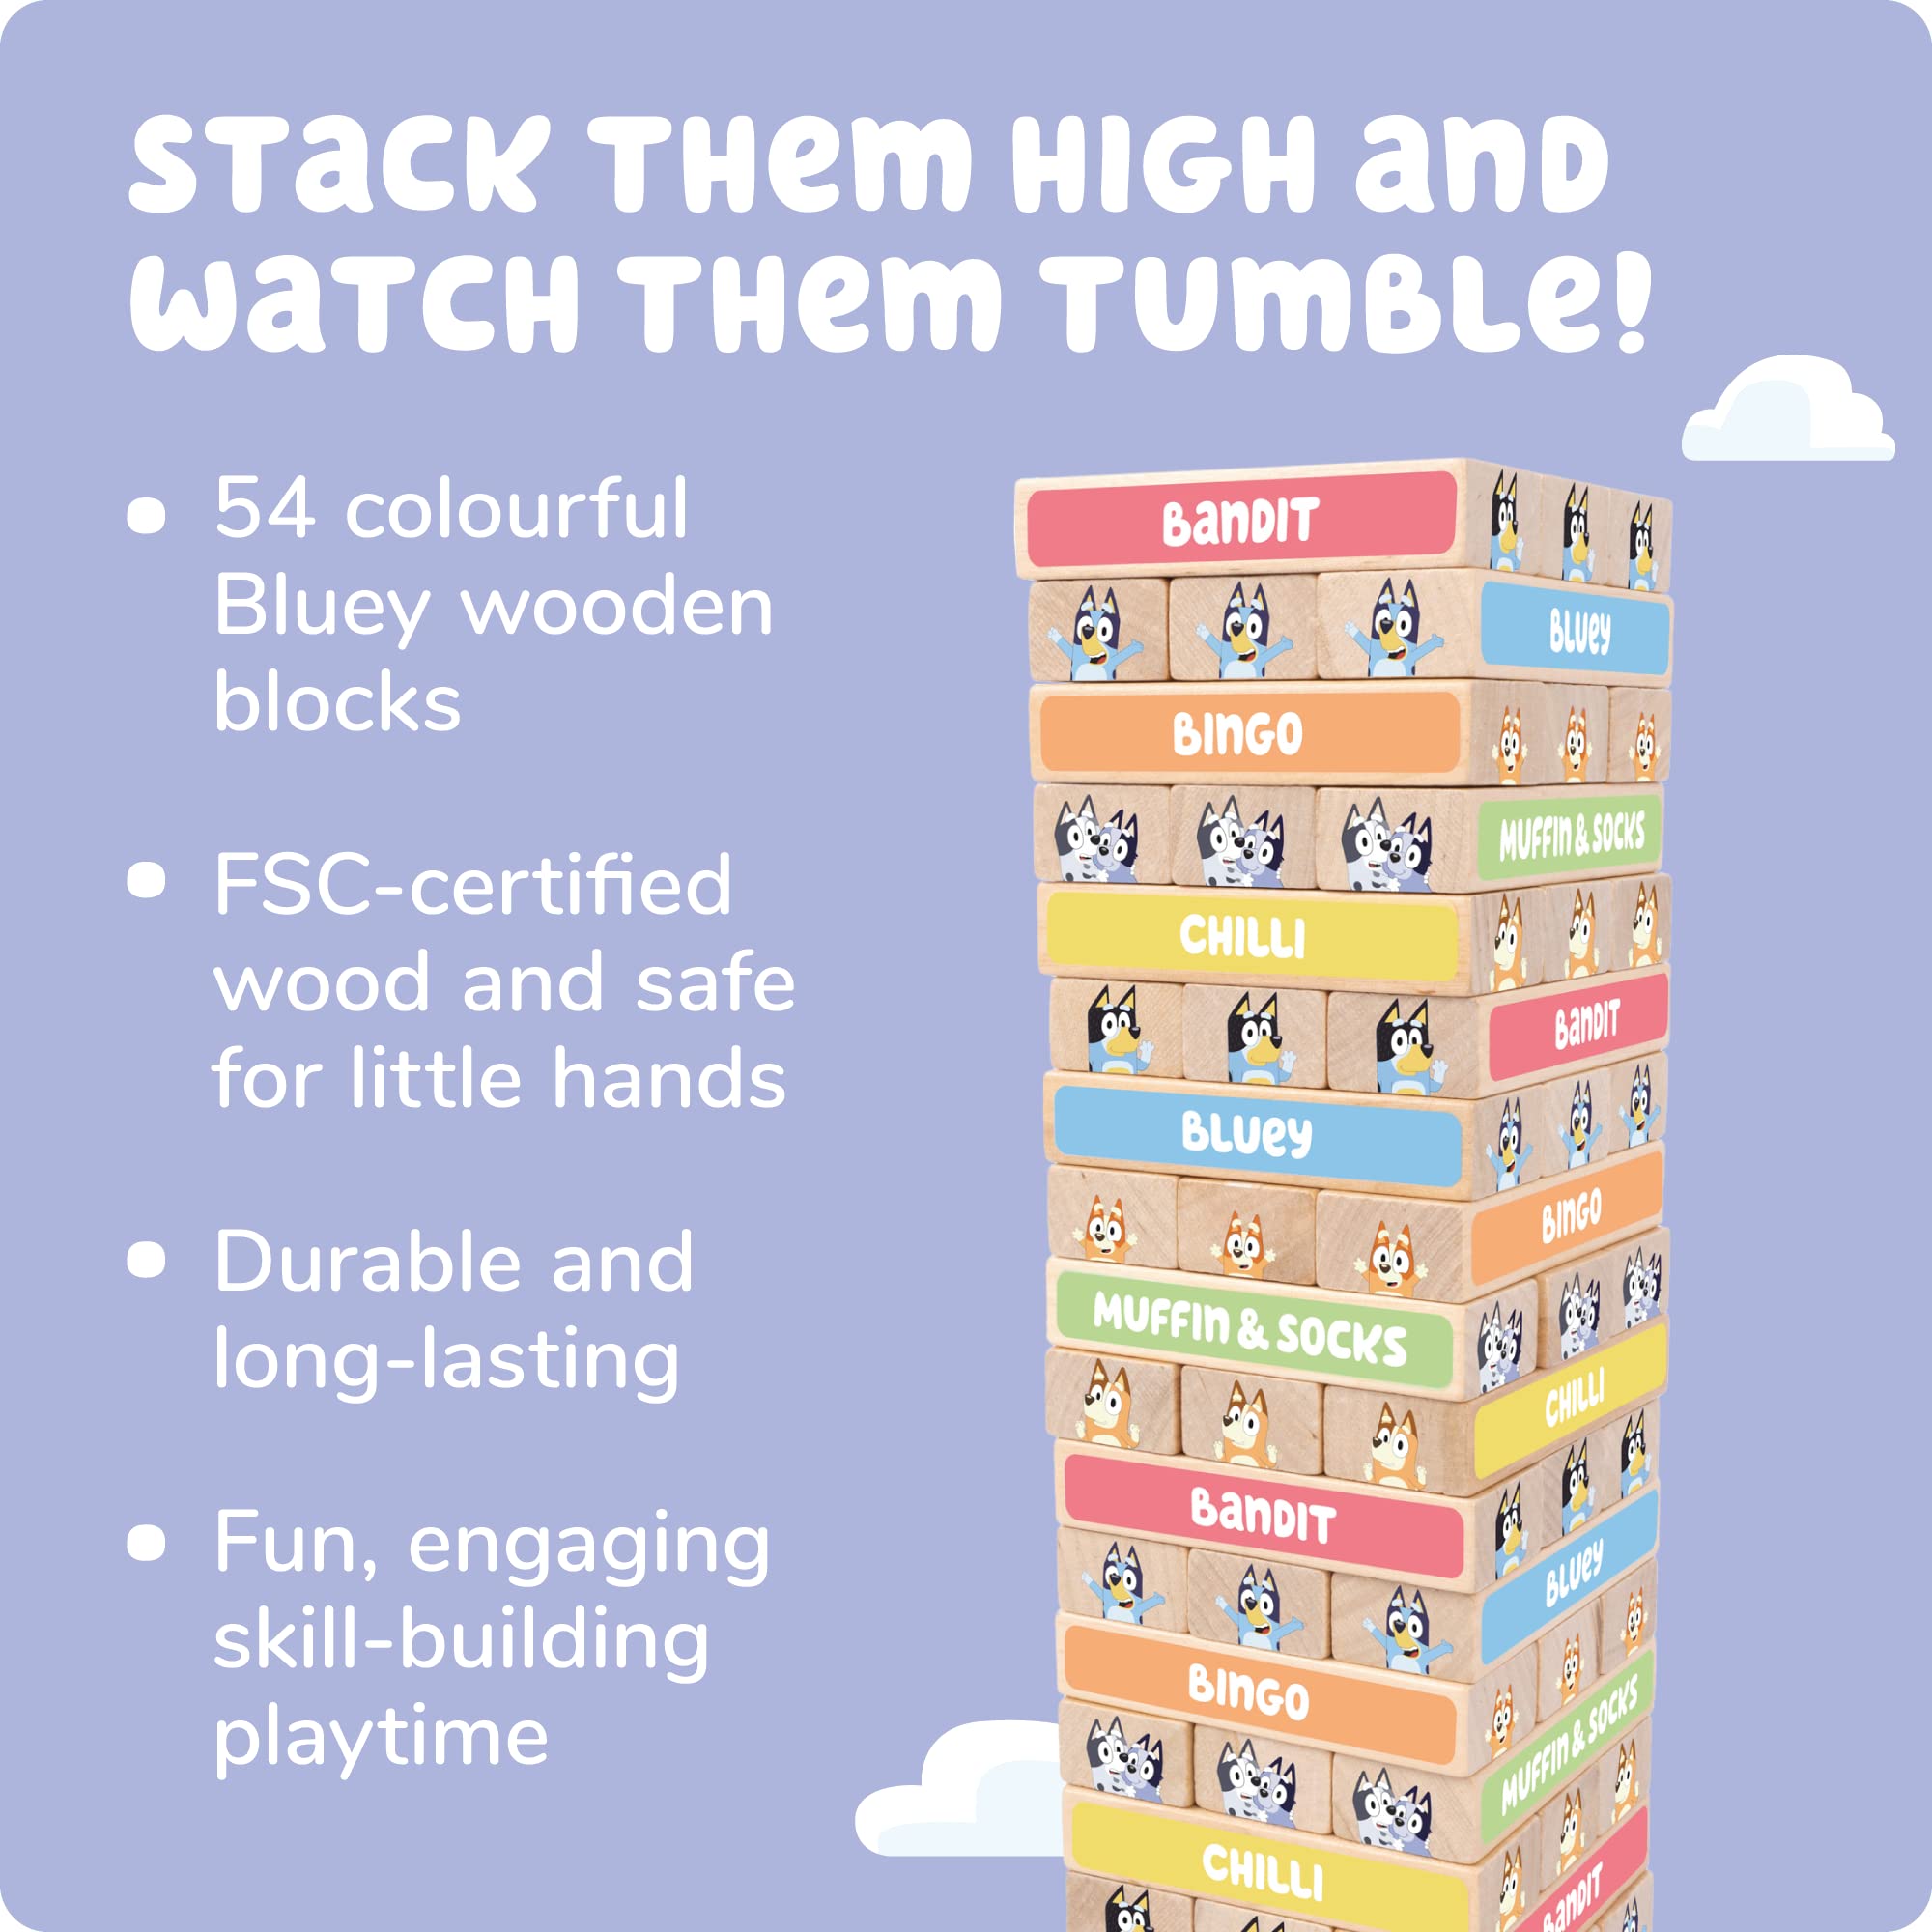 Bluey Tumbling Tower, 54 Colourful Wooden Blocks, Fun Family Game for Hand-Eye Coordination and Motor Skills – FSC Certified for Children 3 Years and Up